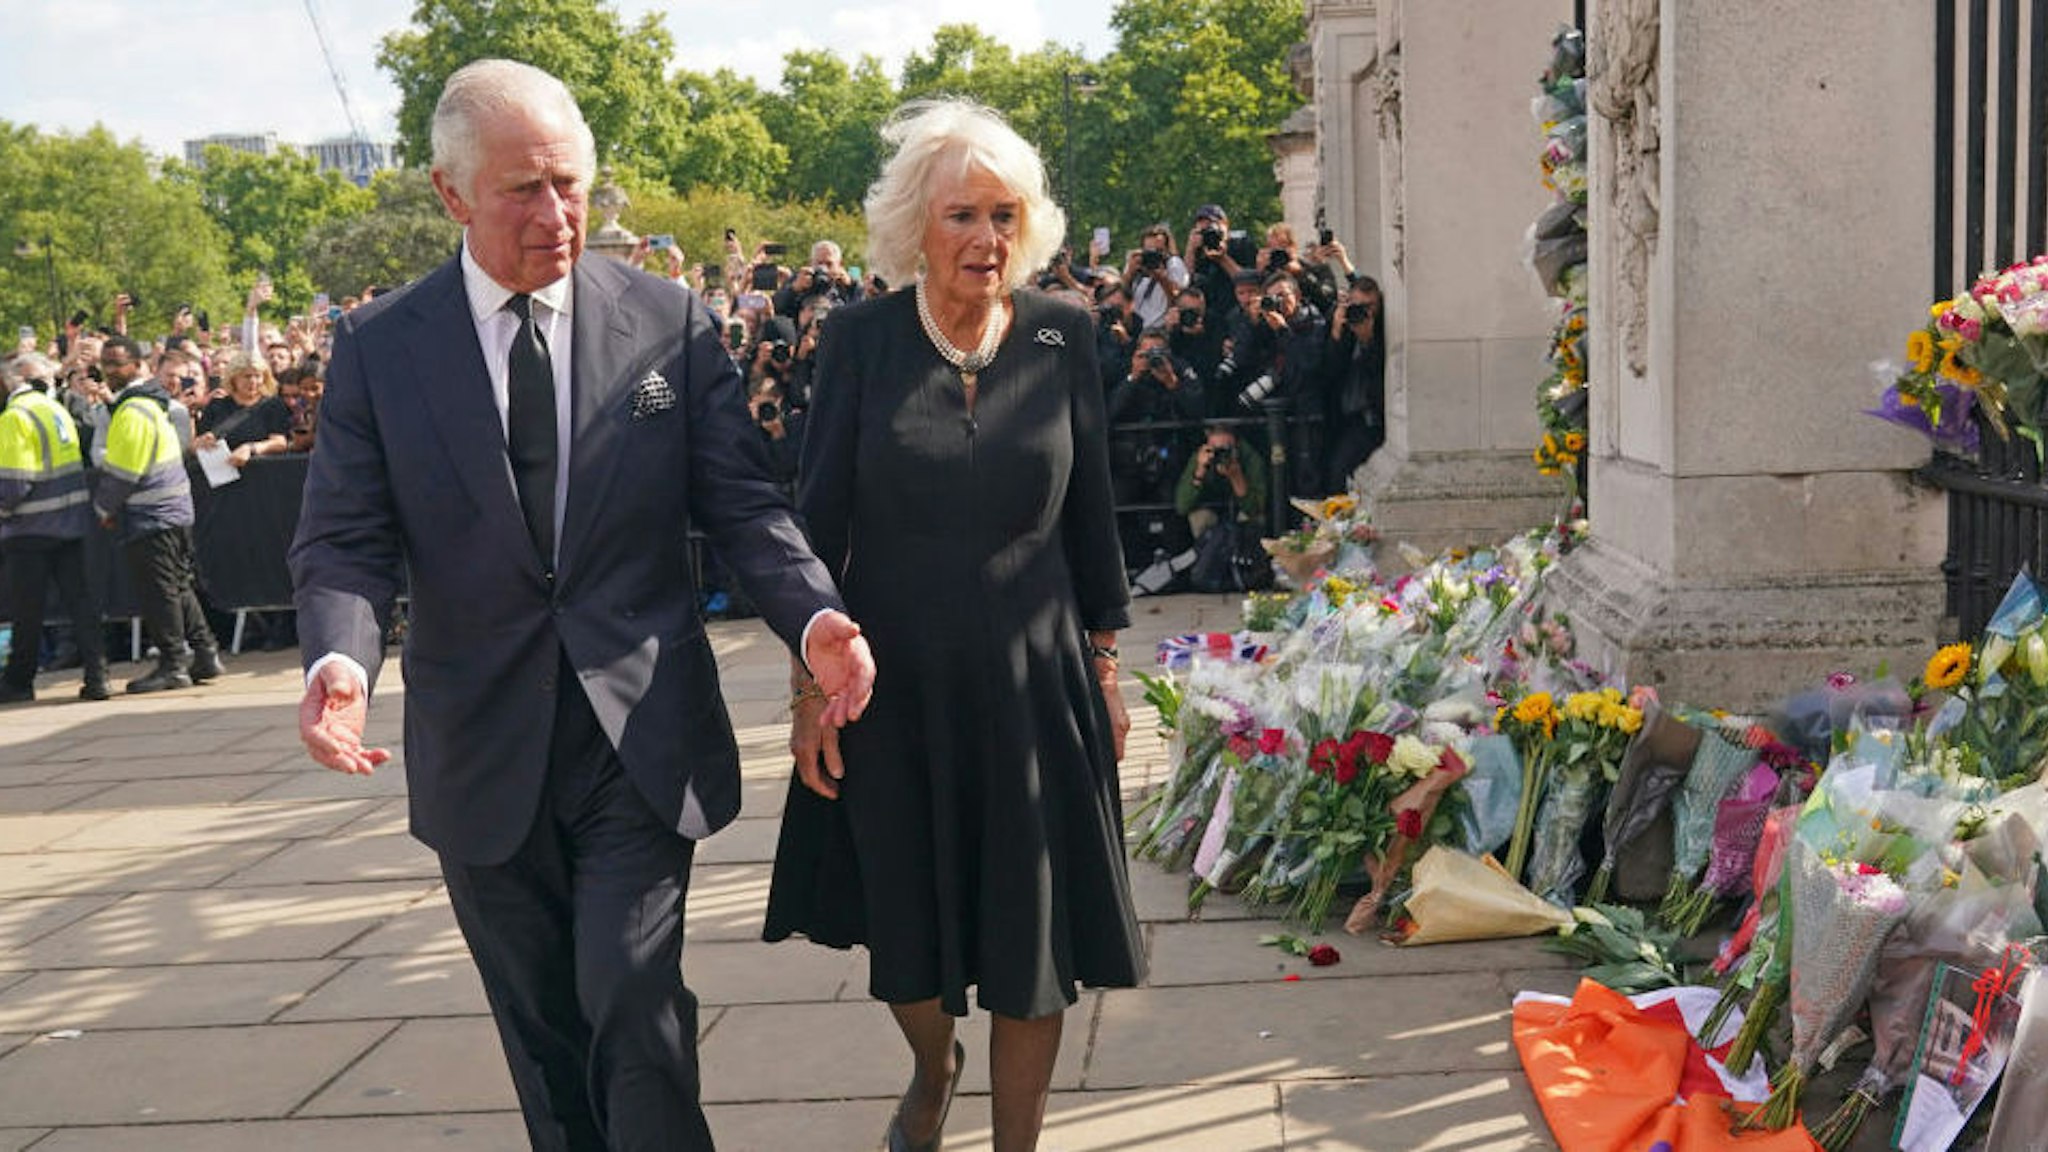 King Charles III and the Queen view tributes left outside Buckingham Palace, London, following the death of Queen Elizabeth II on Thursday. Picture date: Friday September 9, 2022. PA Photo. See PA story DEATH Queen.